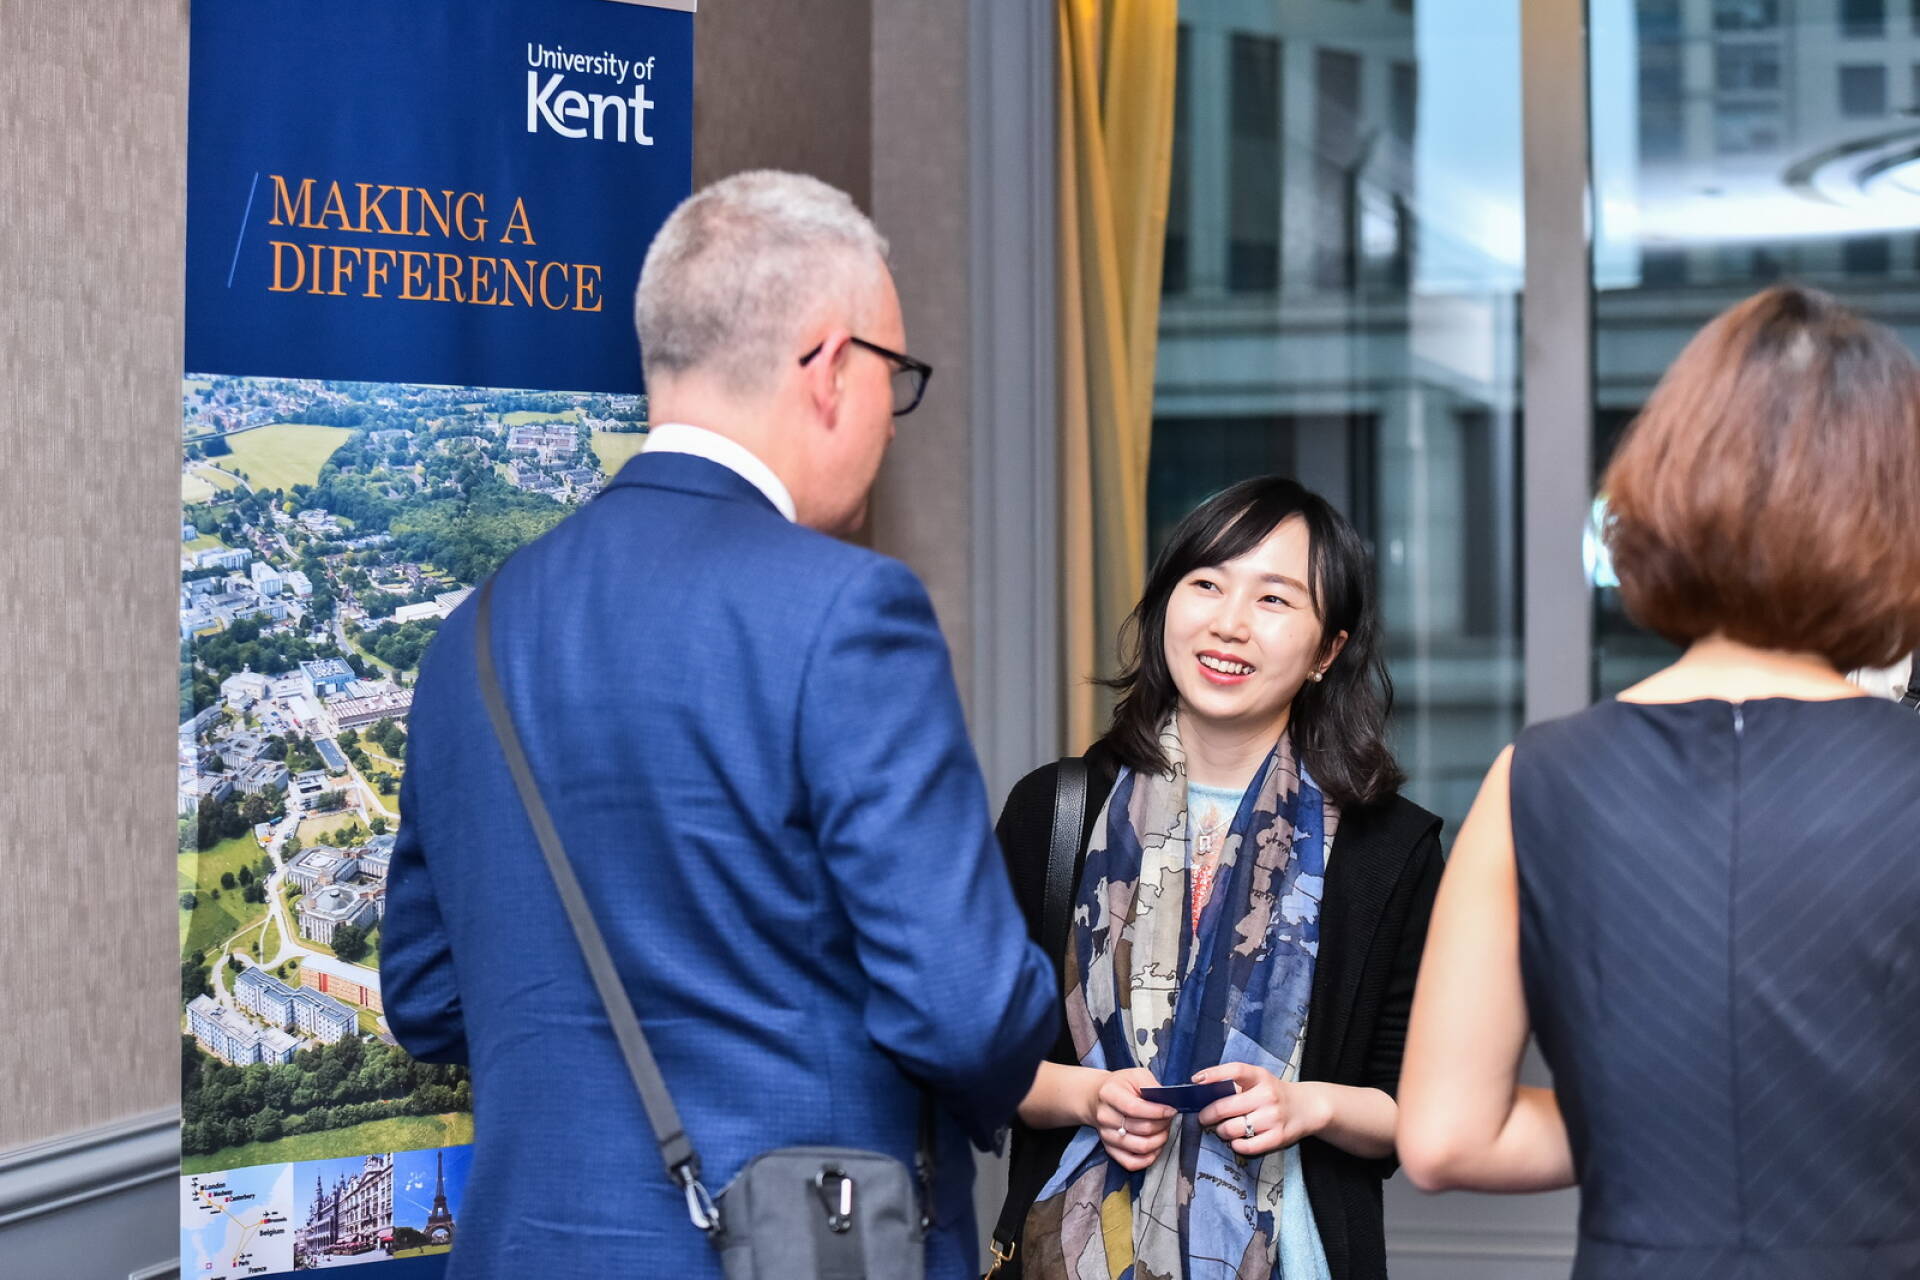 University of Kent event with international partners